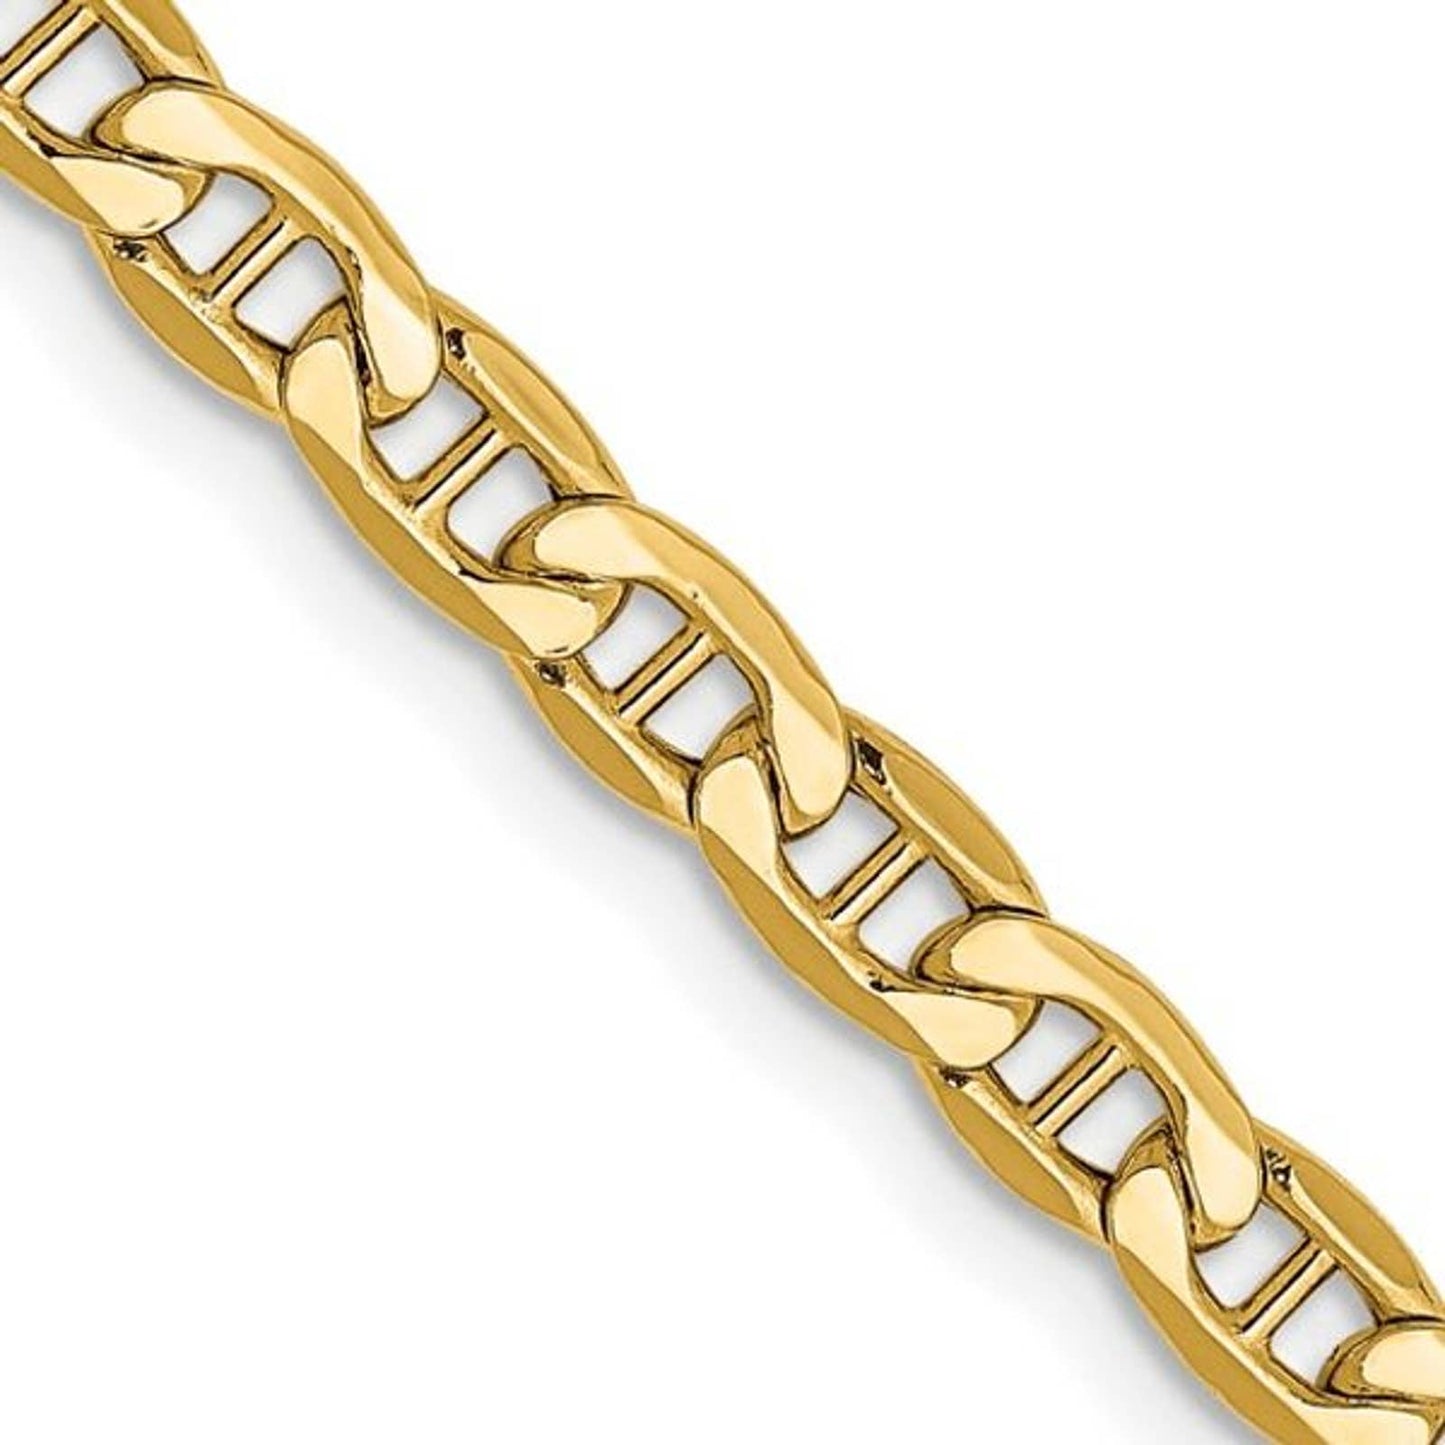 10k Gold Anchor Link Chain- 22 inches long- 4mm wide